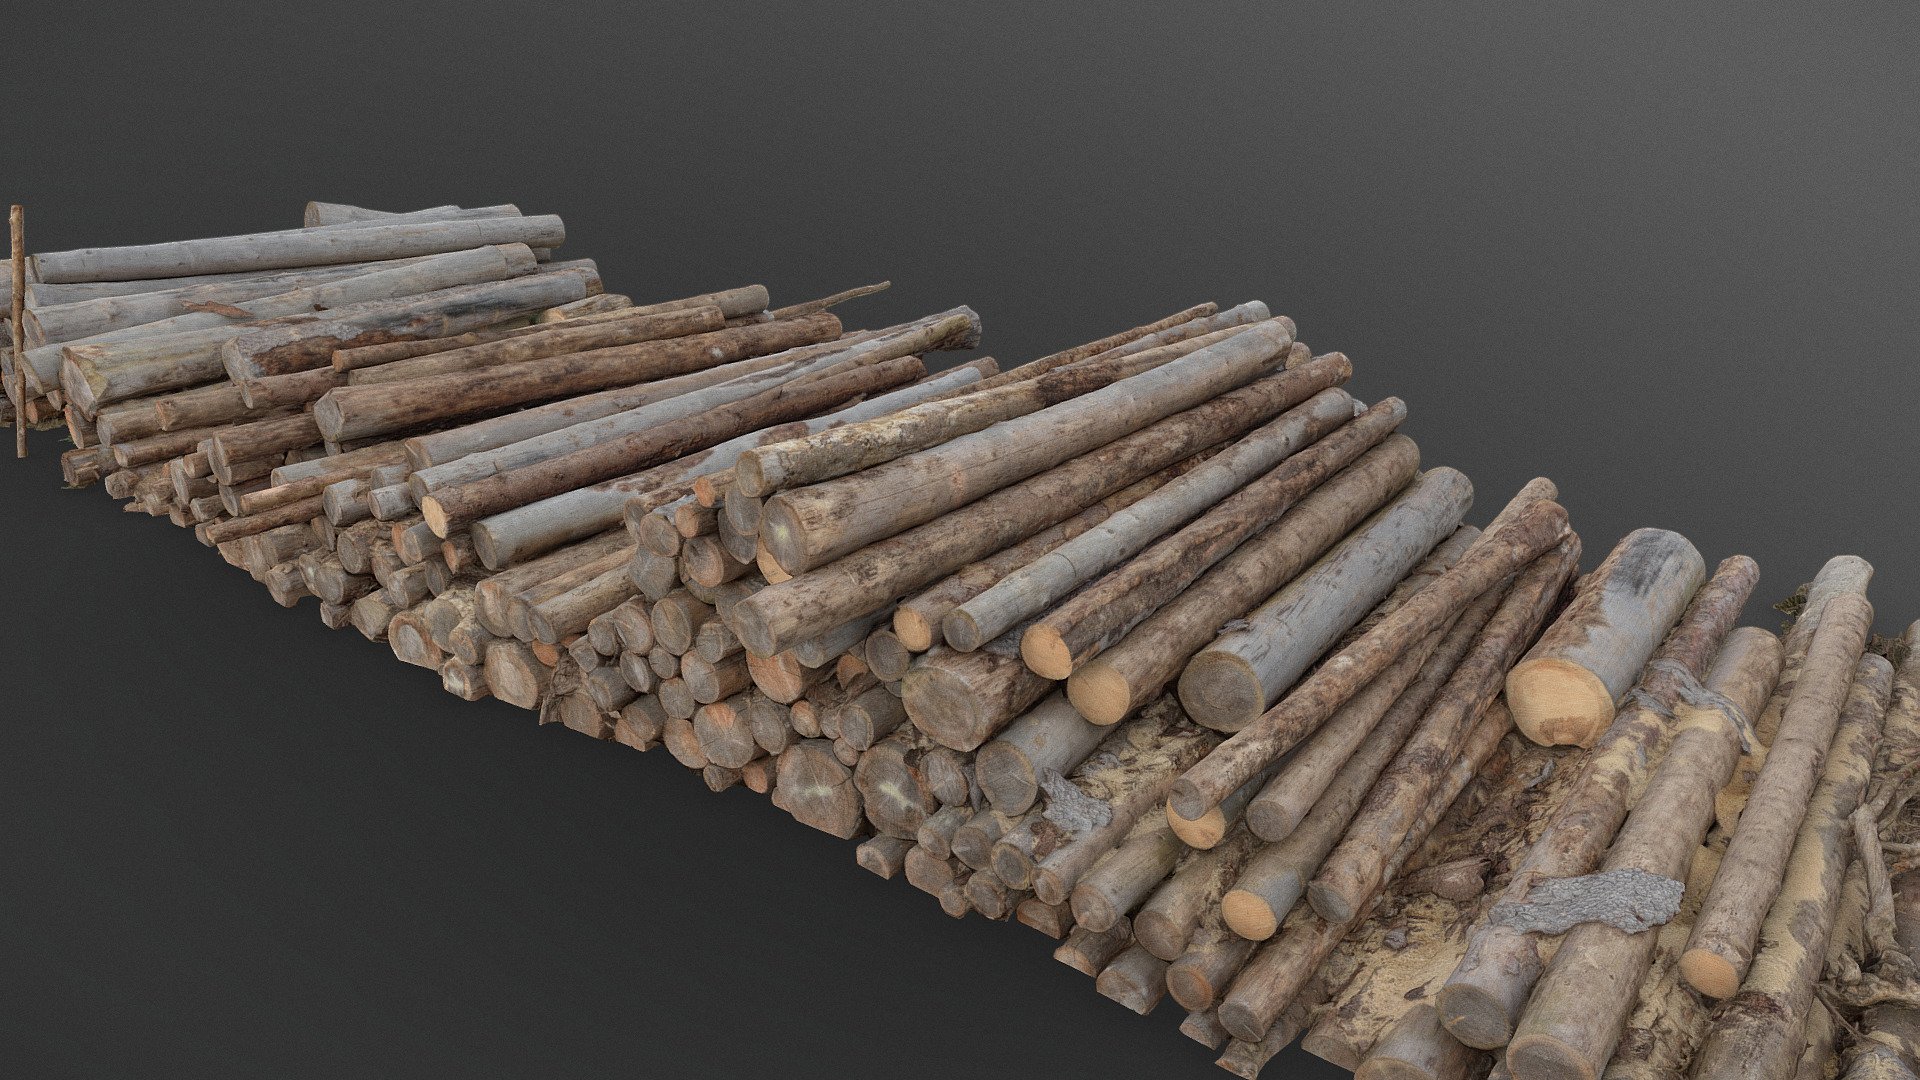 Felled Cut trees pine spruce logs stack stacked heap in forest, isolated trunks logging stacked pile, bark-less wood lumber timber harvesting industry megascan

photogrammetry scan, 5x8K texture + HD normals - Felled trees pine logs stack heap in forest - Buy Royalty Free 3D model by matousekfoto 3d model